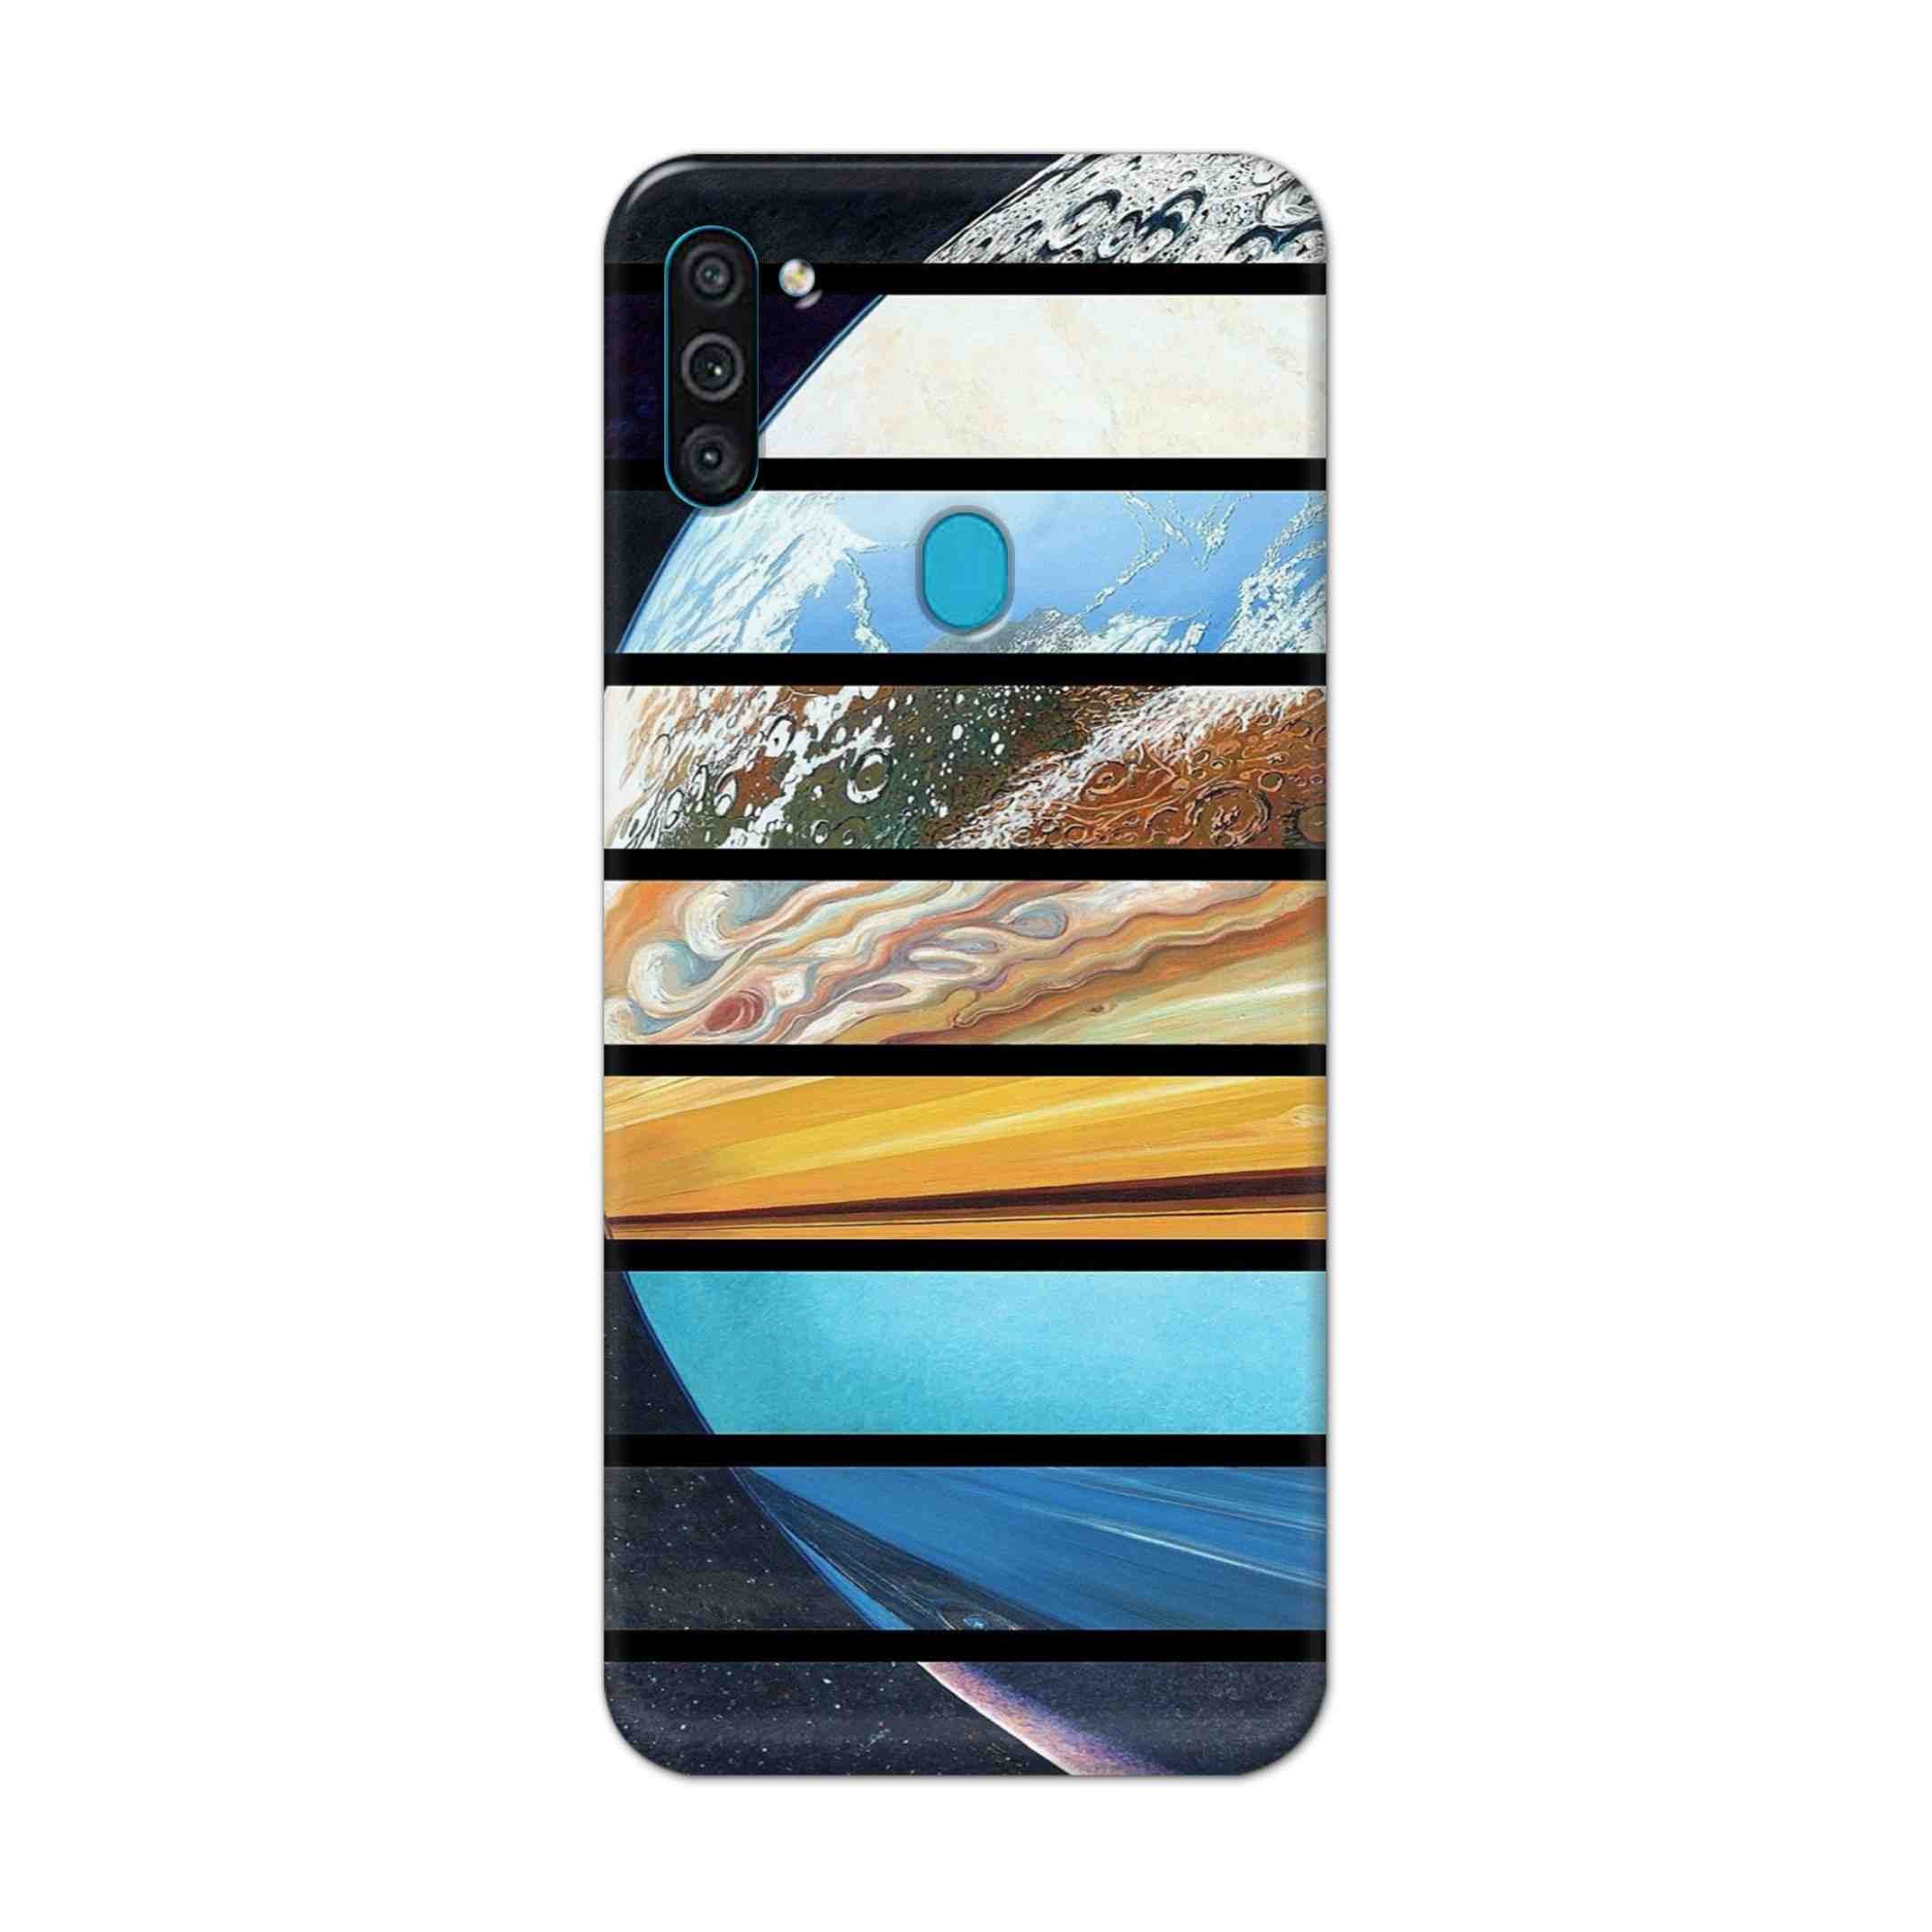 Buy Colourful Earth Hard Back Mobile Phone Case Cover For Samsung Galaxy M11 Online